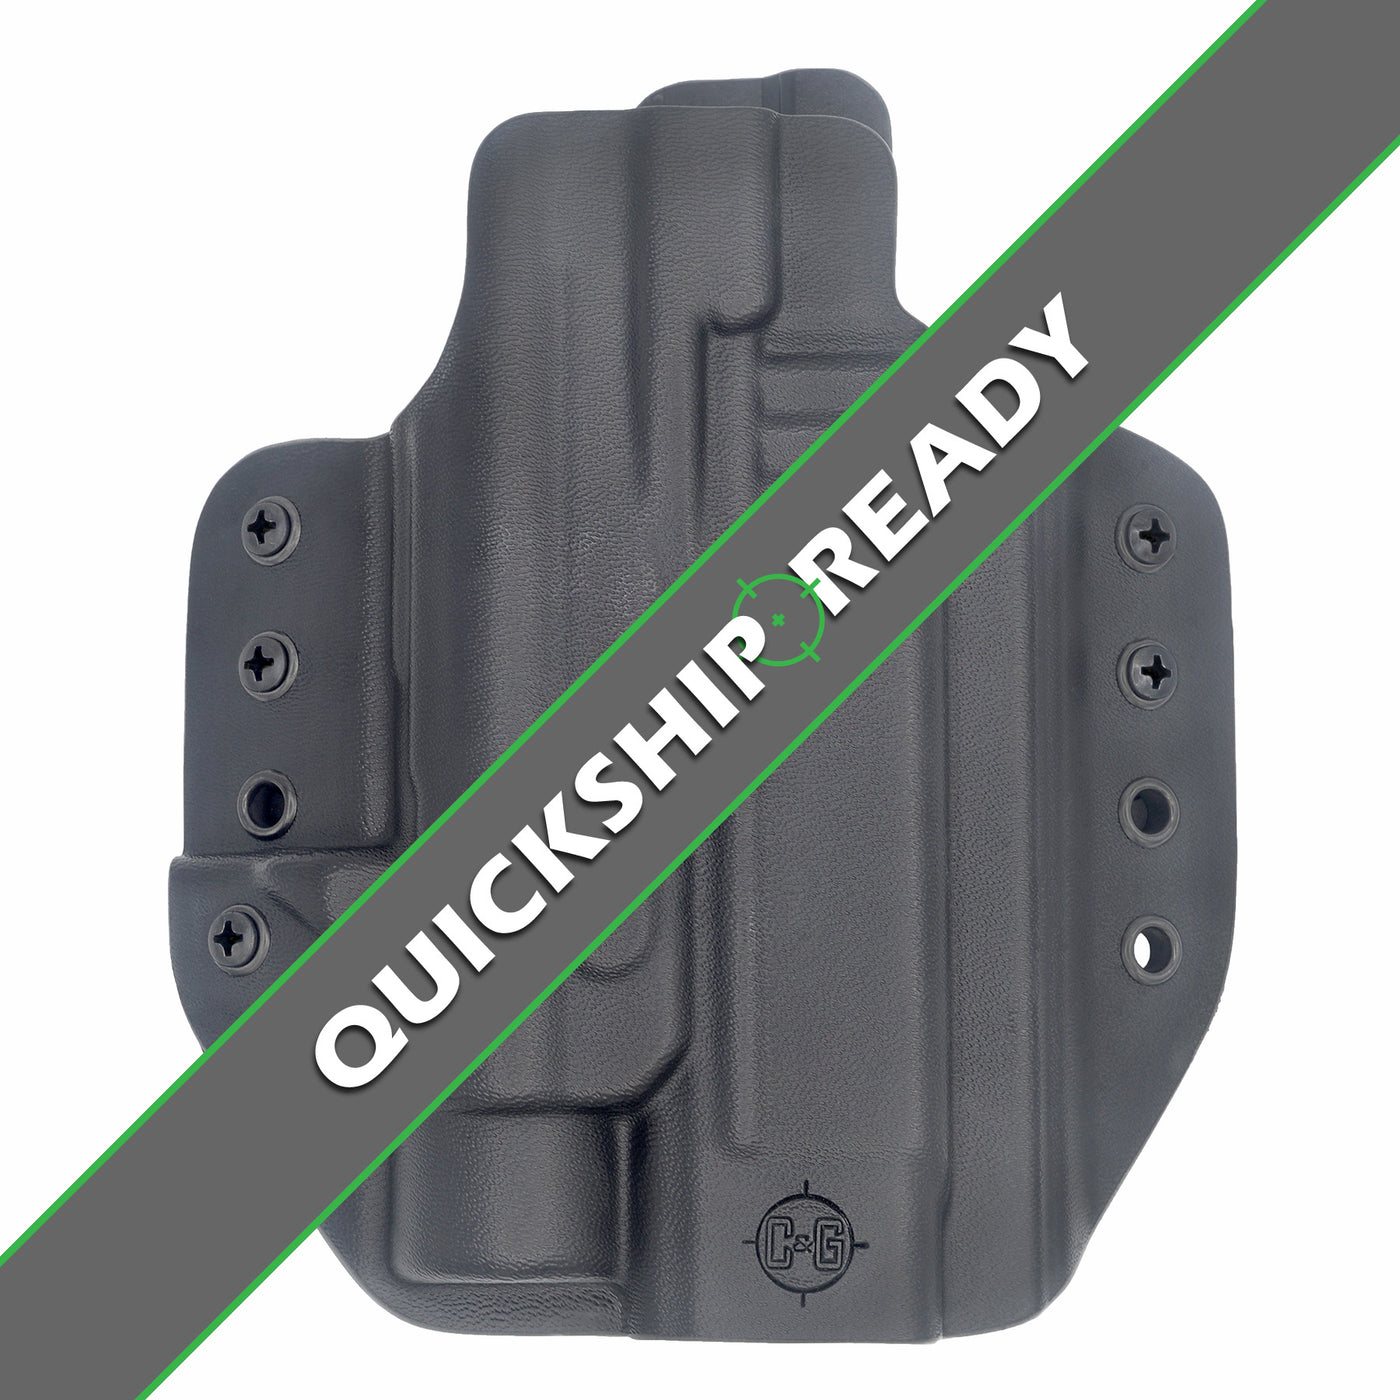 C&G Holsters quickship OWB Tactical CZ P10/c Streamlight TLR-1